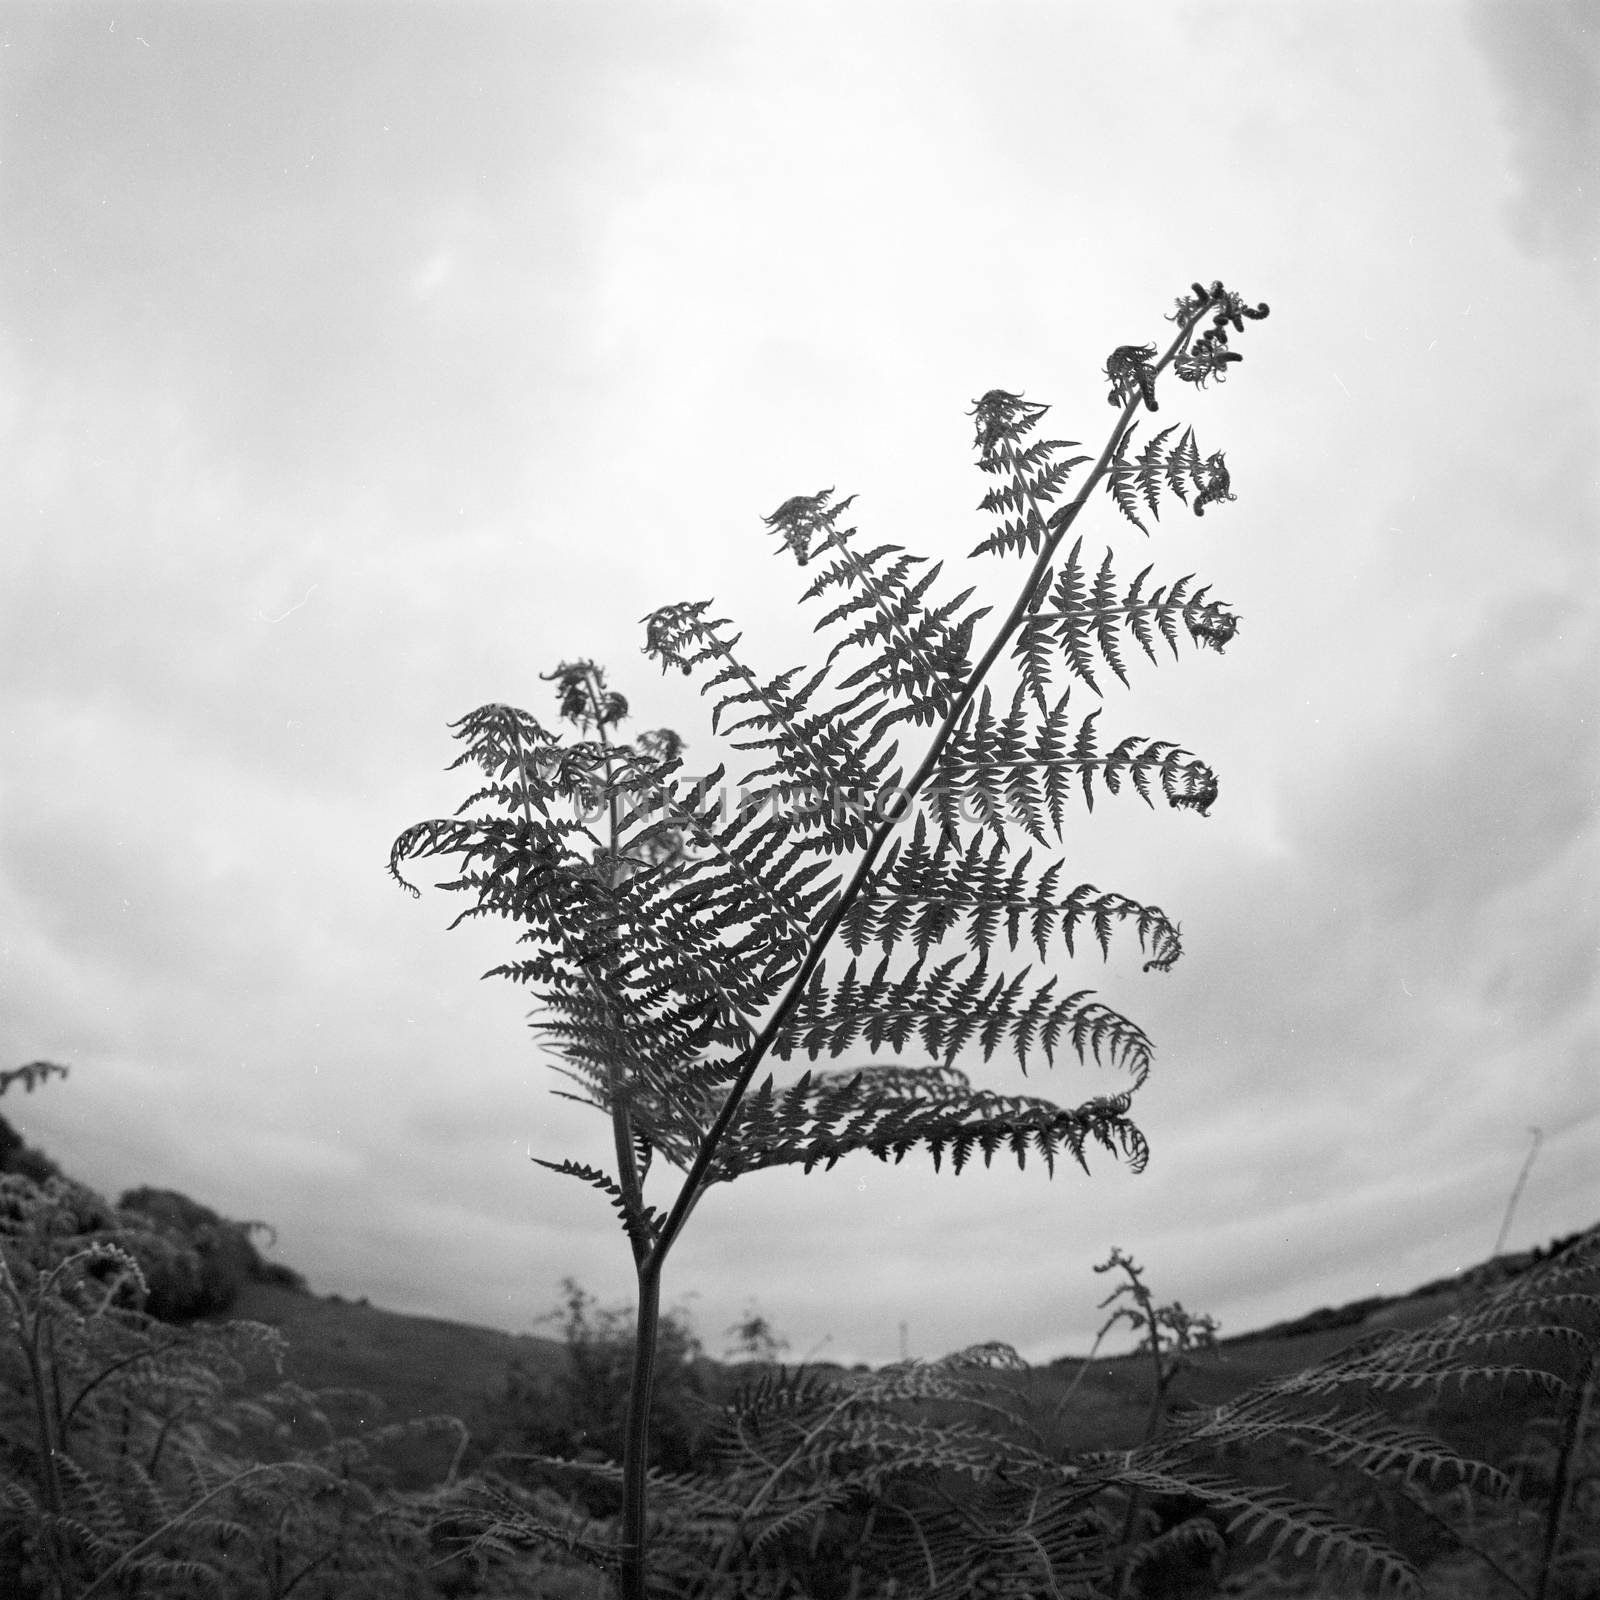 Blakc and white film image of fern against sky